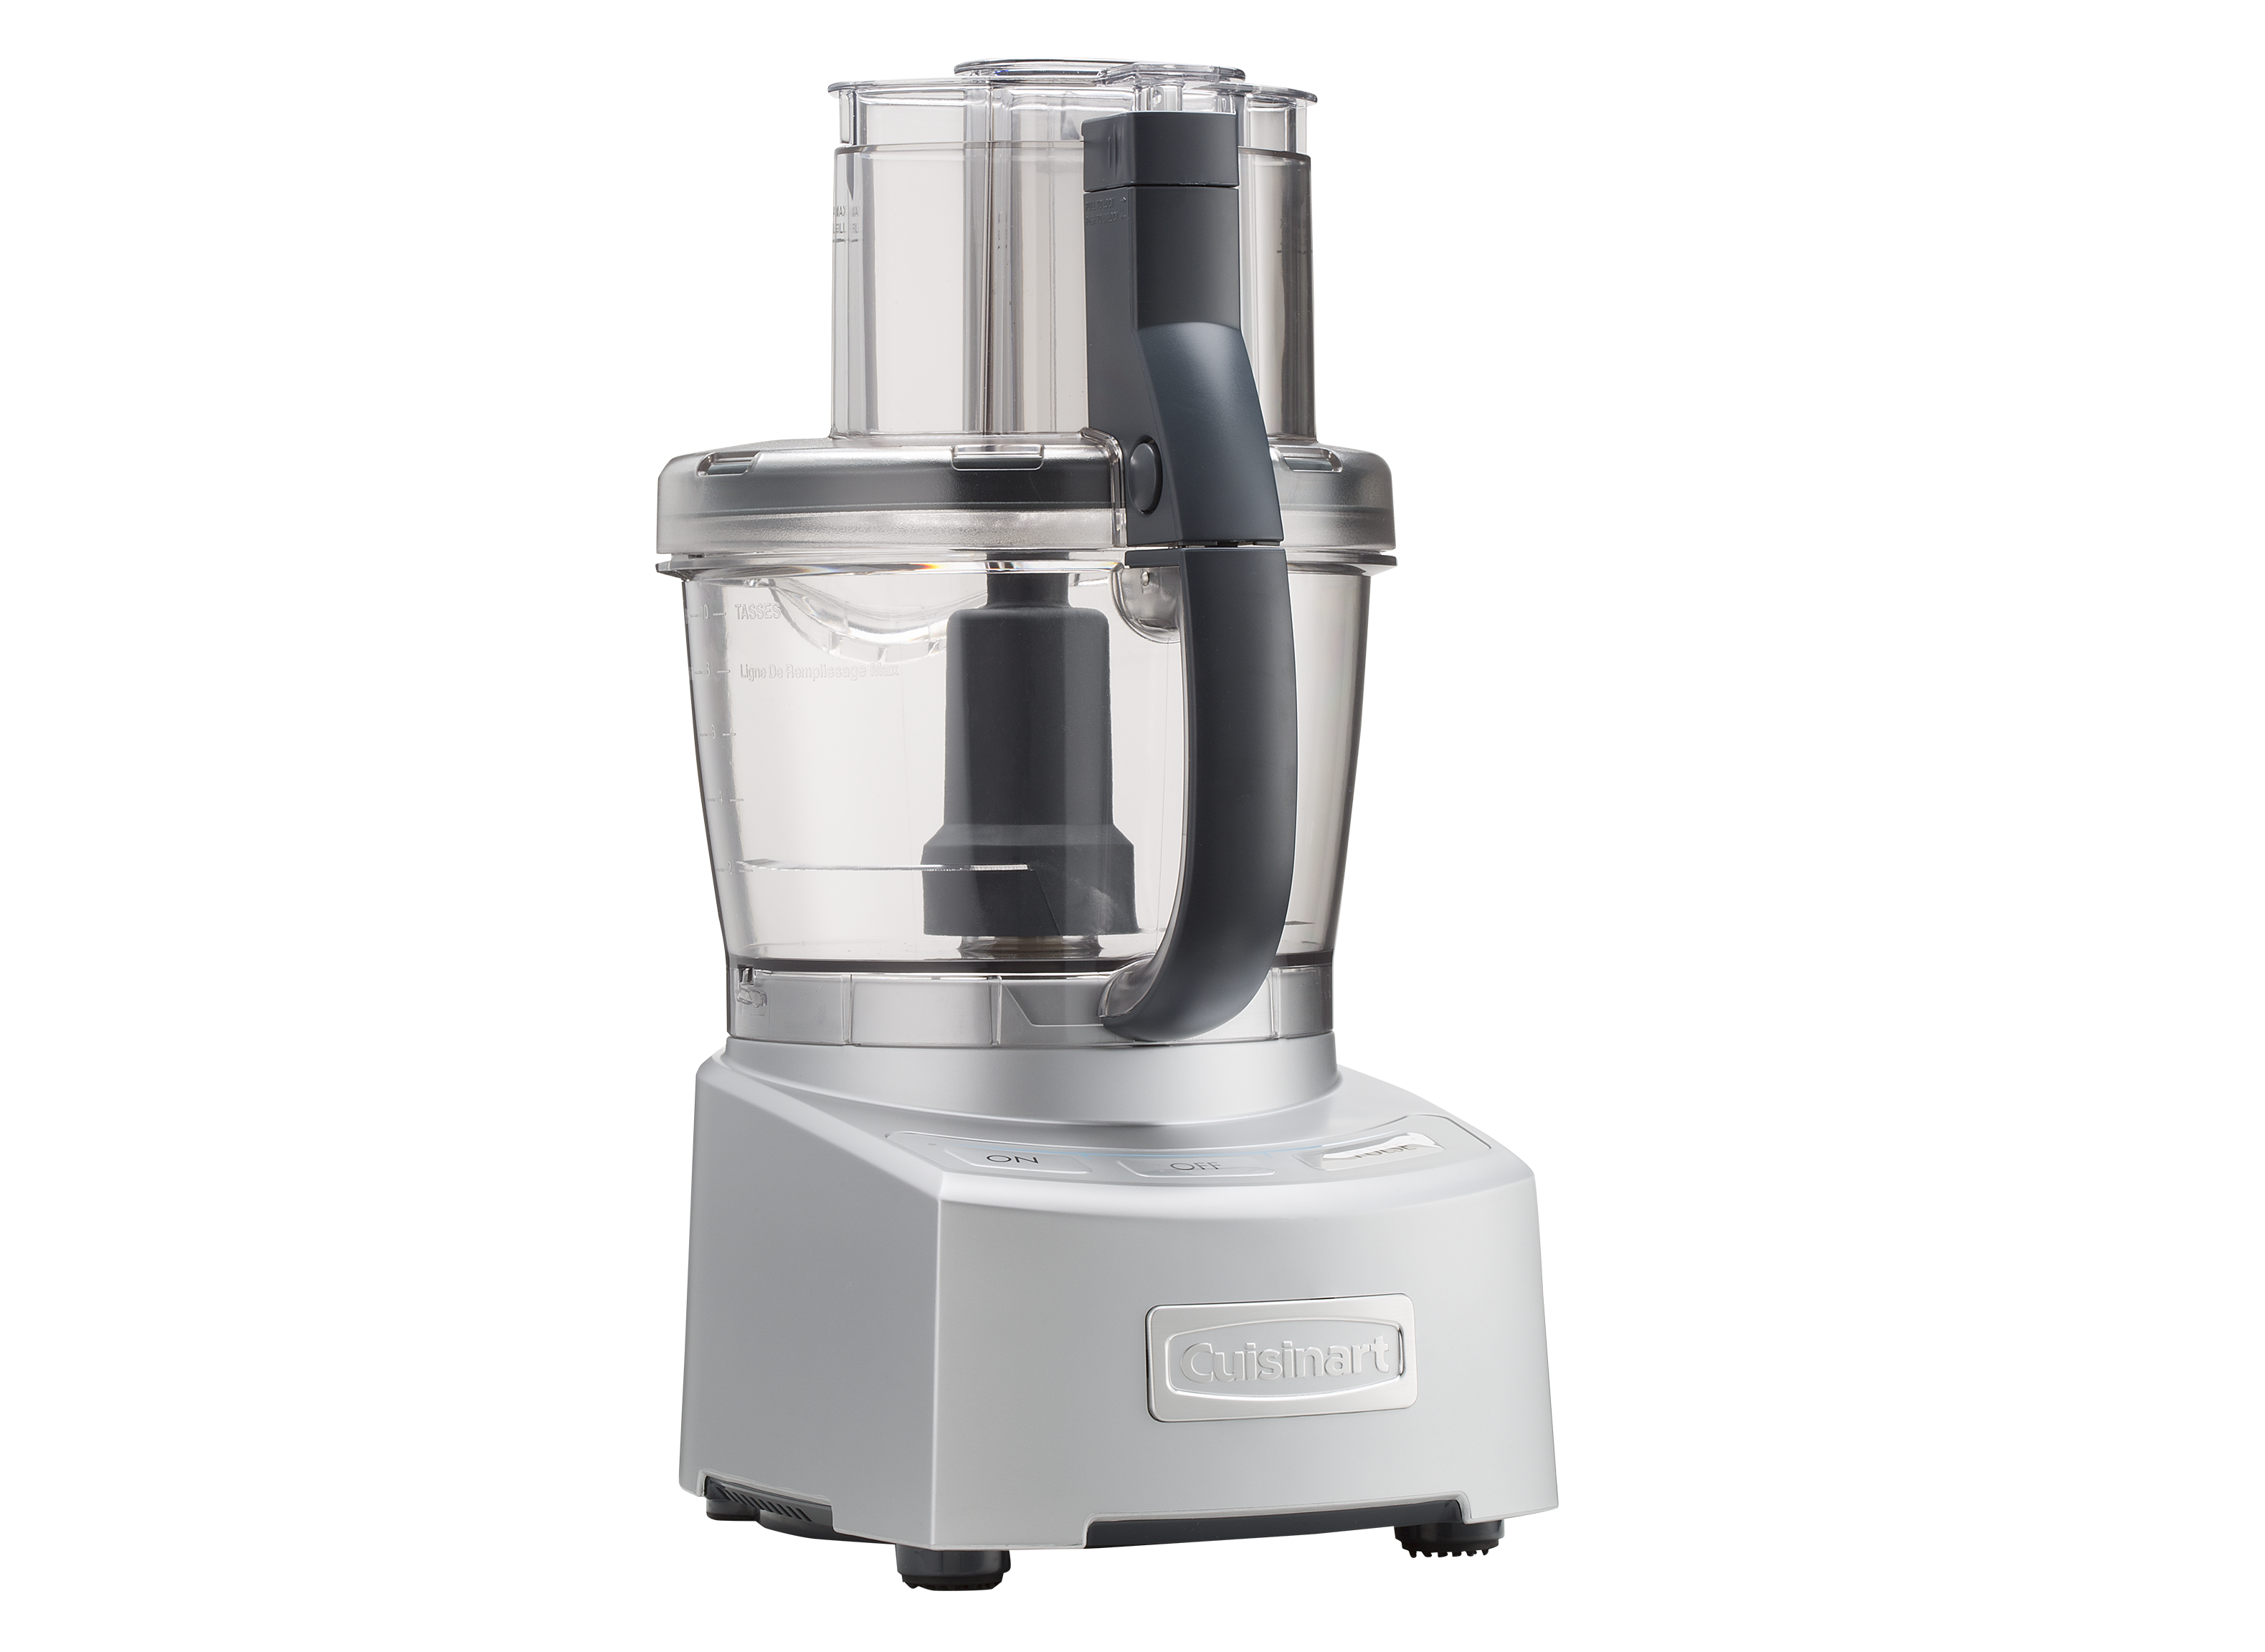 https://crdms.images.consumerreports.org/prod/products/cr/models/384532-foodprocessors-cuisinart-elitecollection20fp12bcn.png